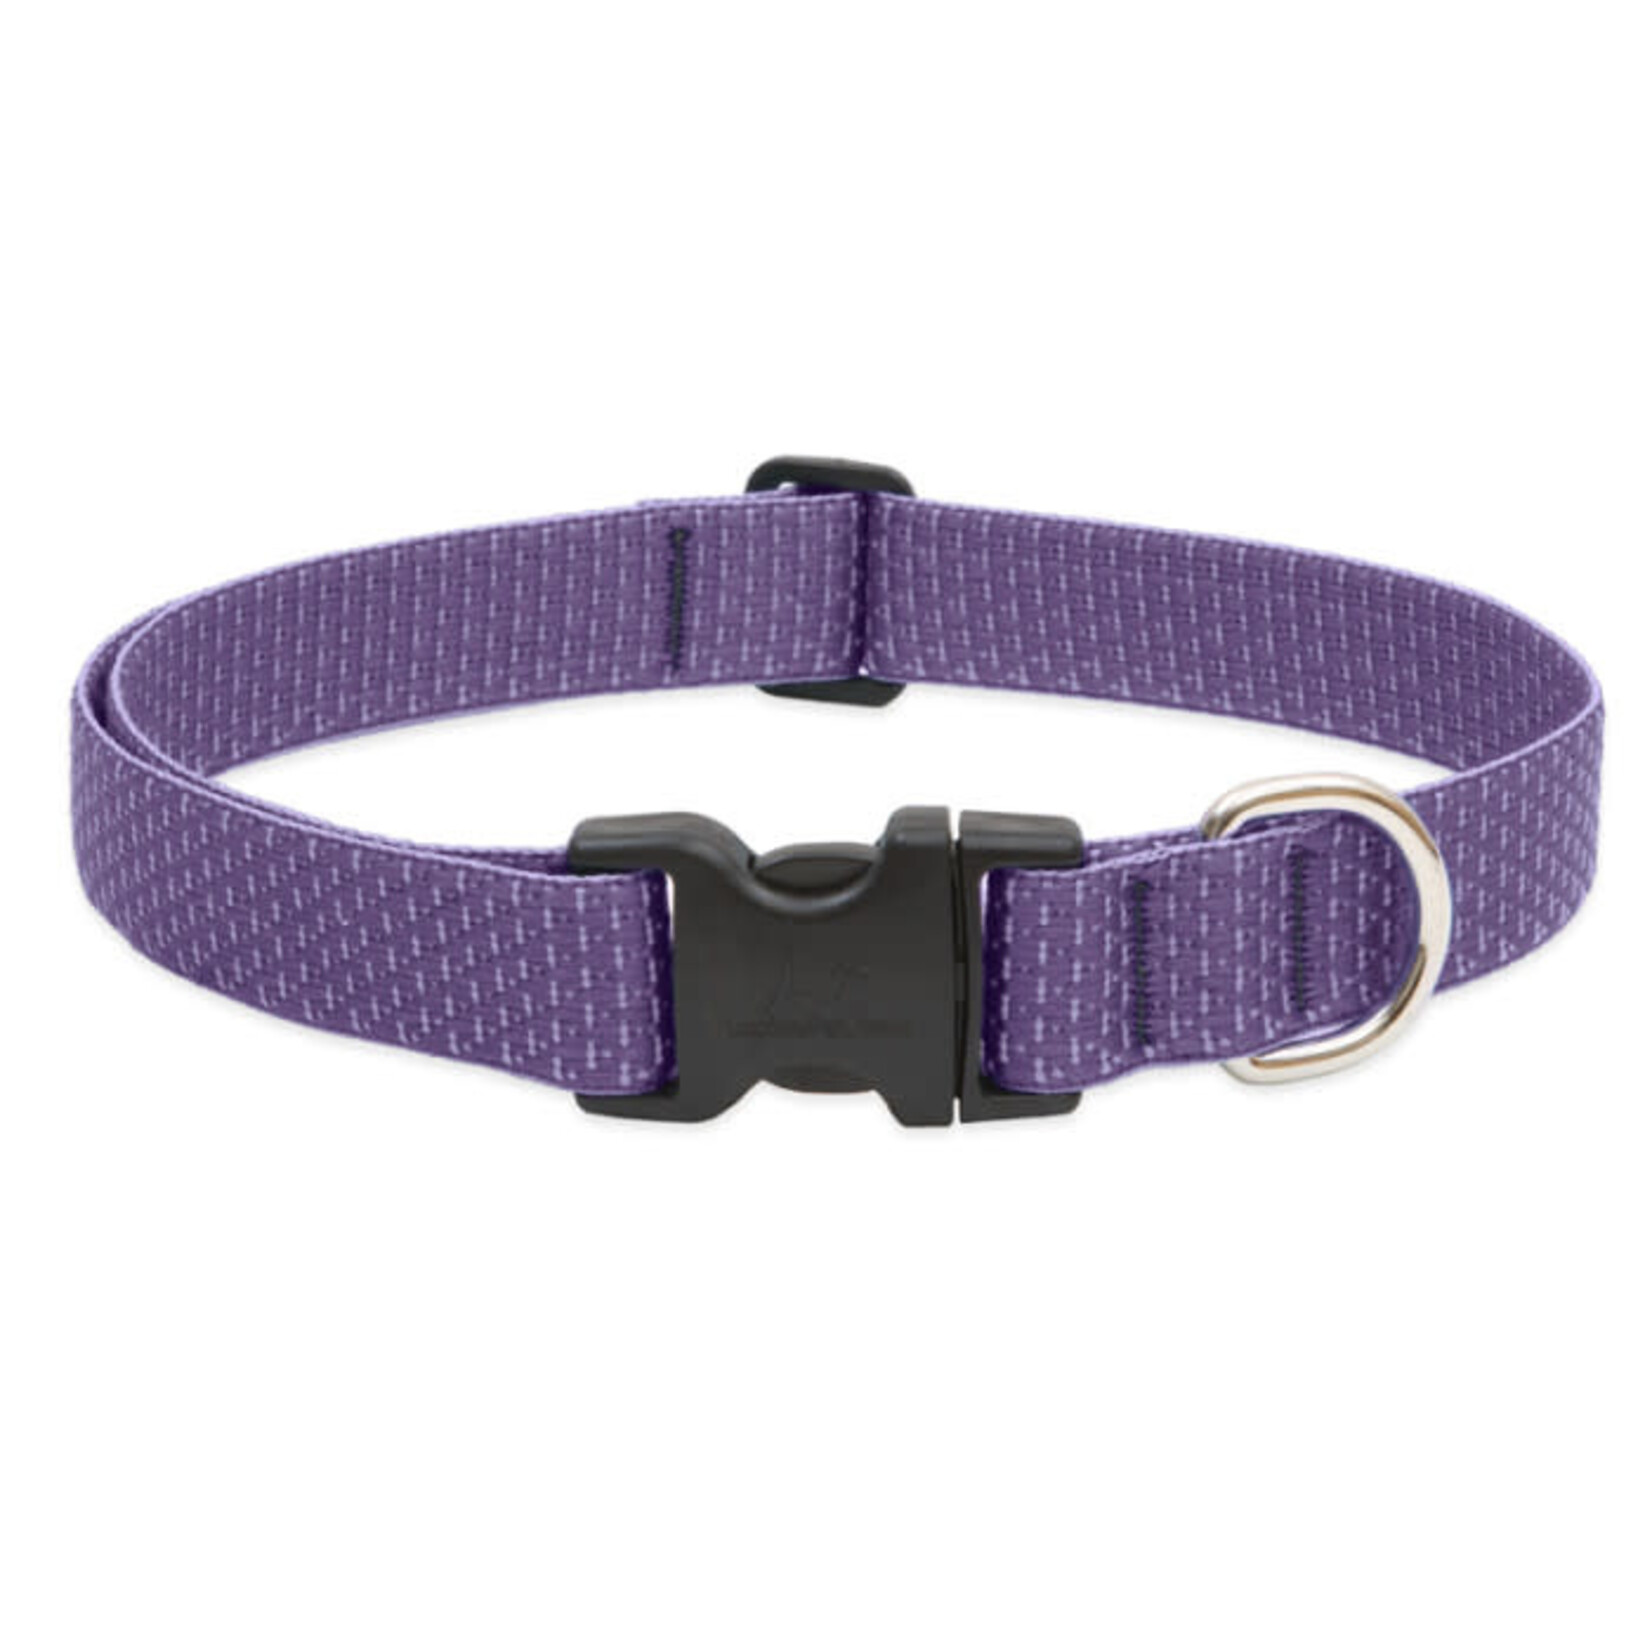 Lupine Lupine Lilac 1 in x 16-28 in Adjustable Collar